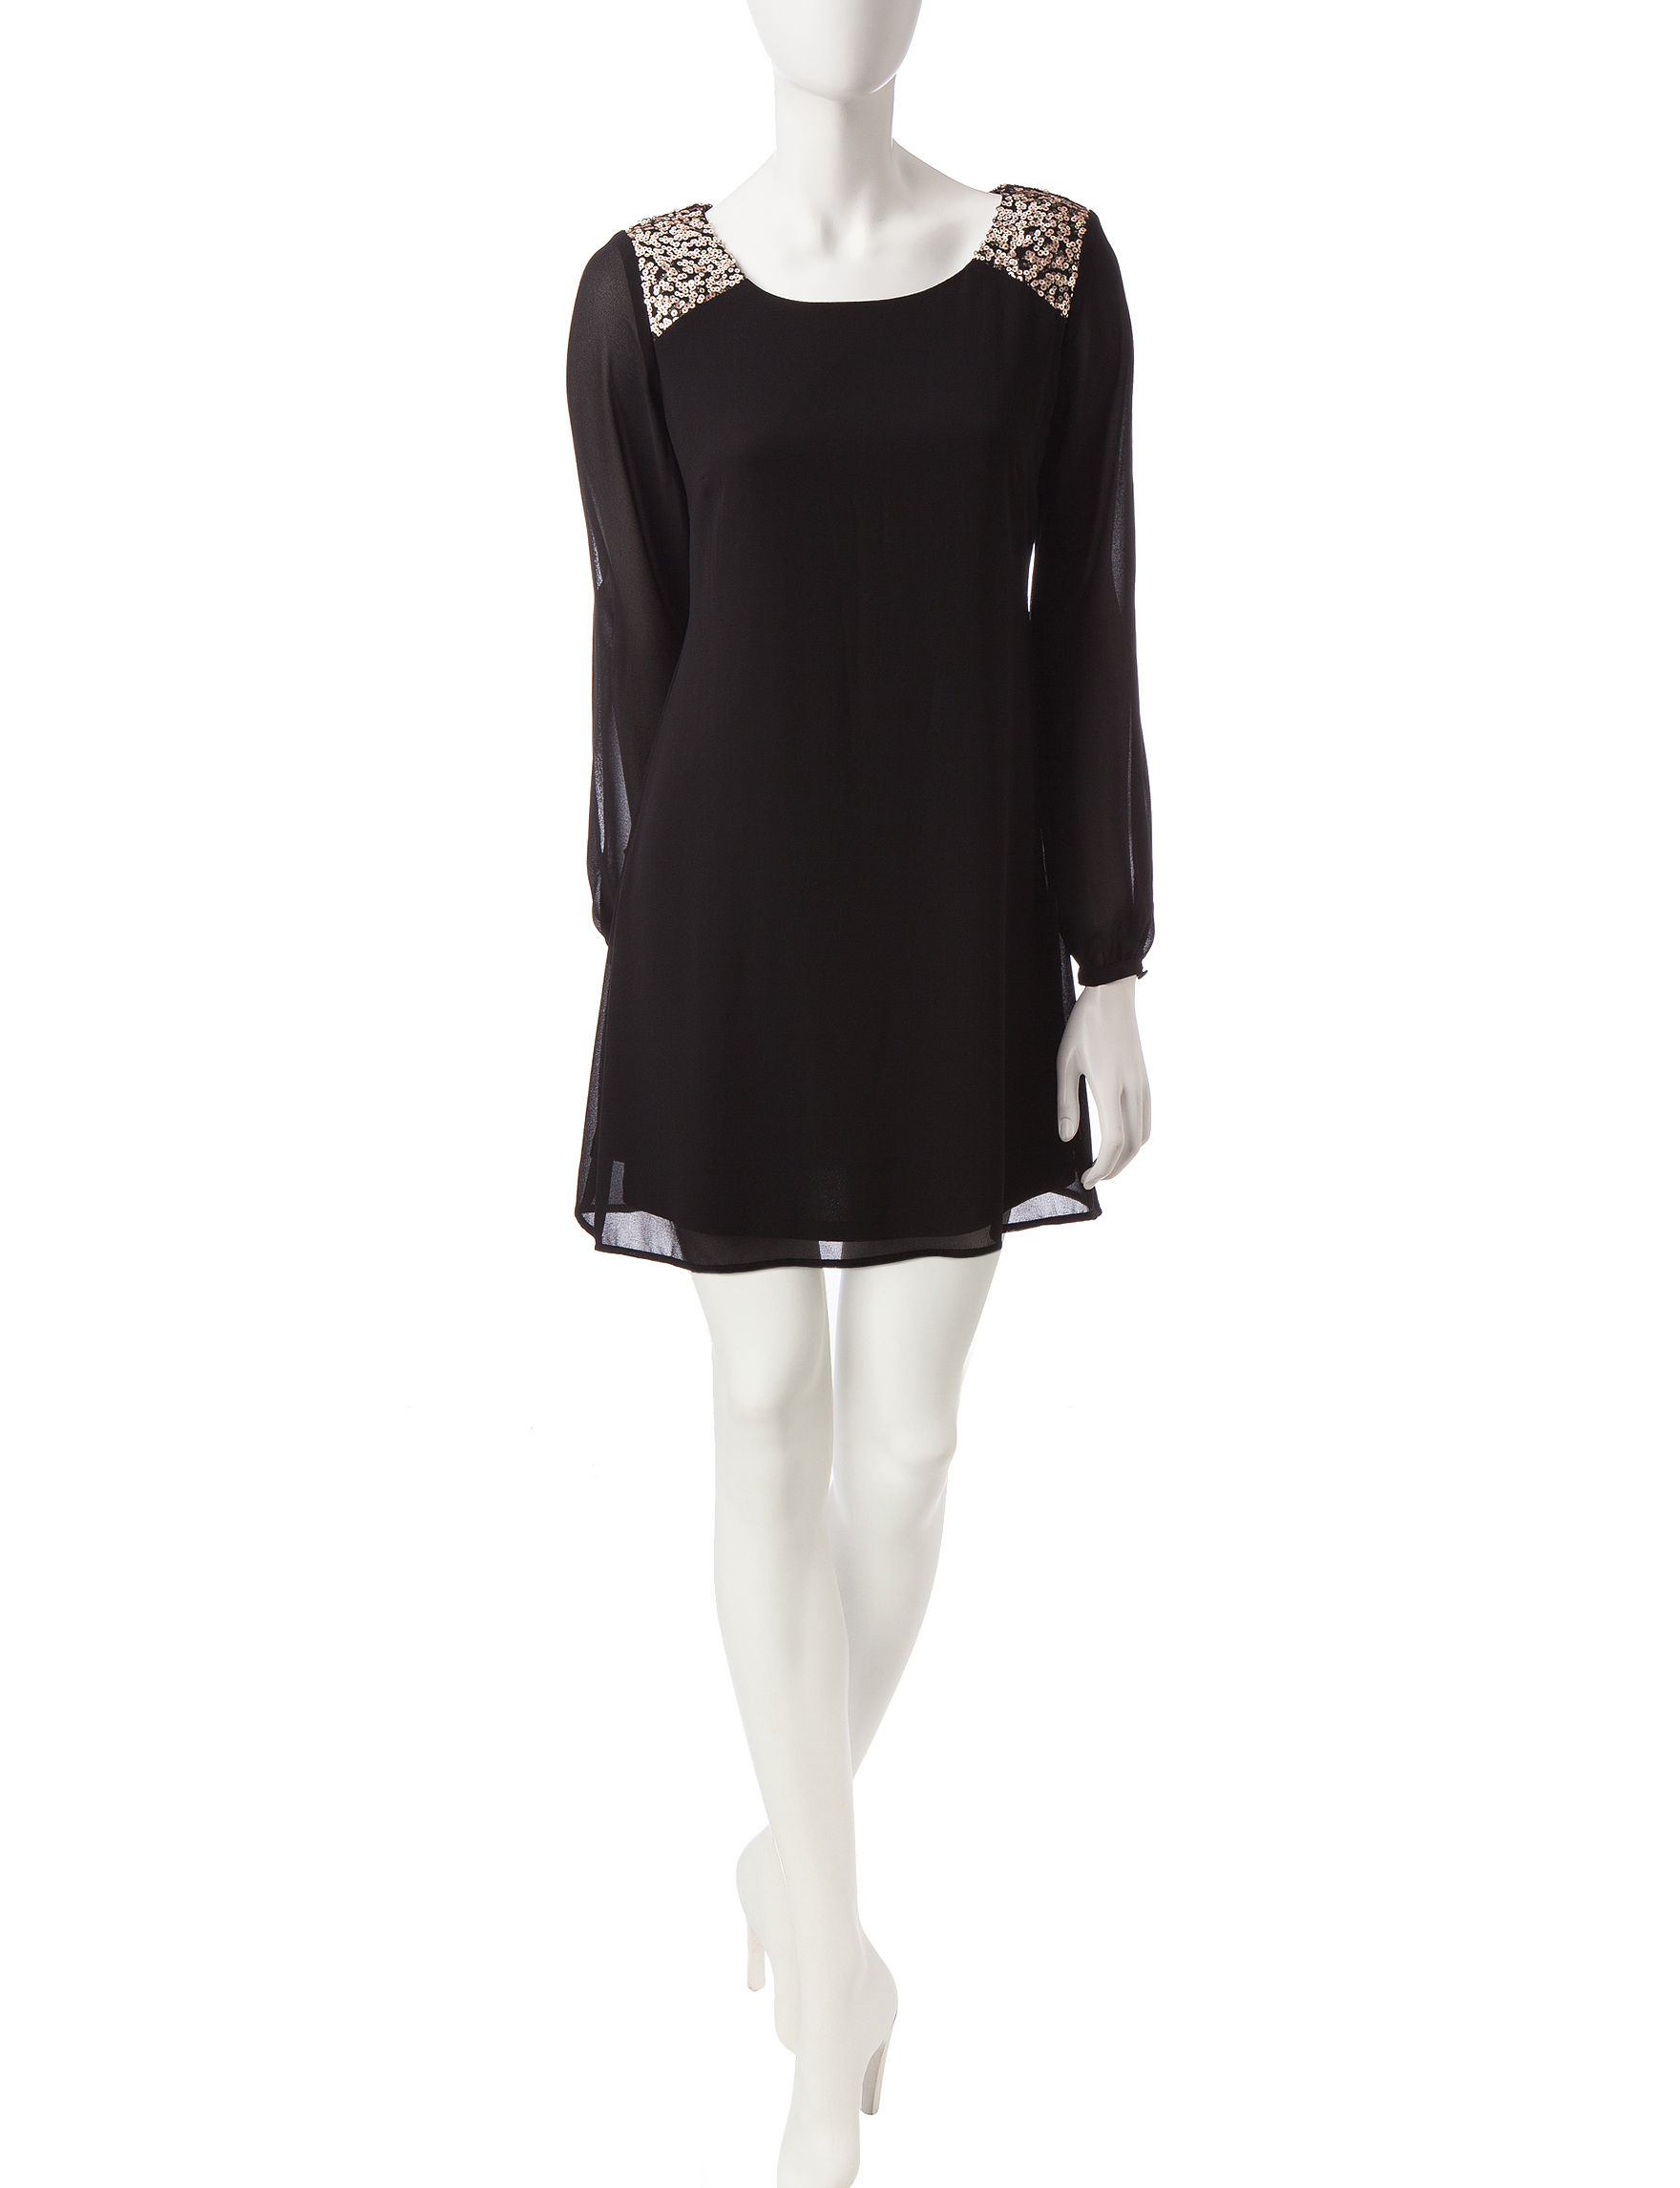 My Michelle Black Dress - Always In Fashion For All Occasions